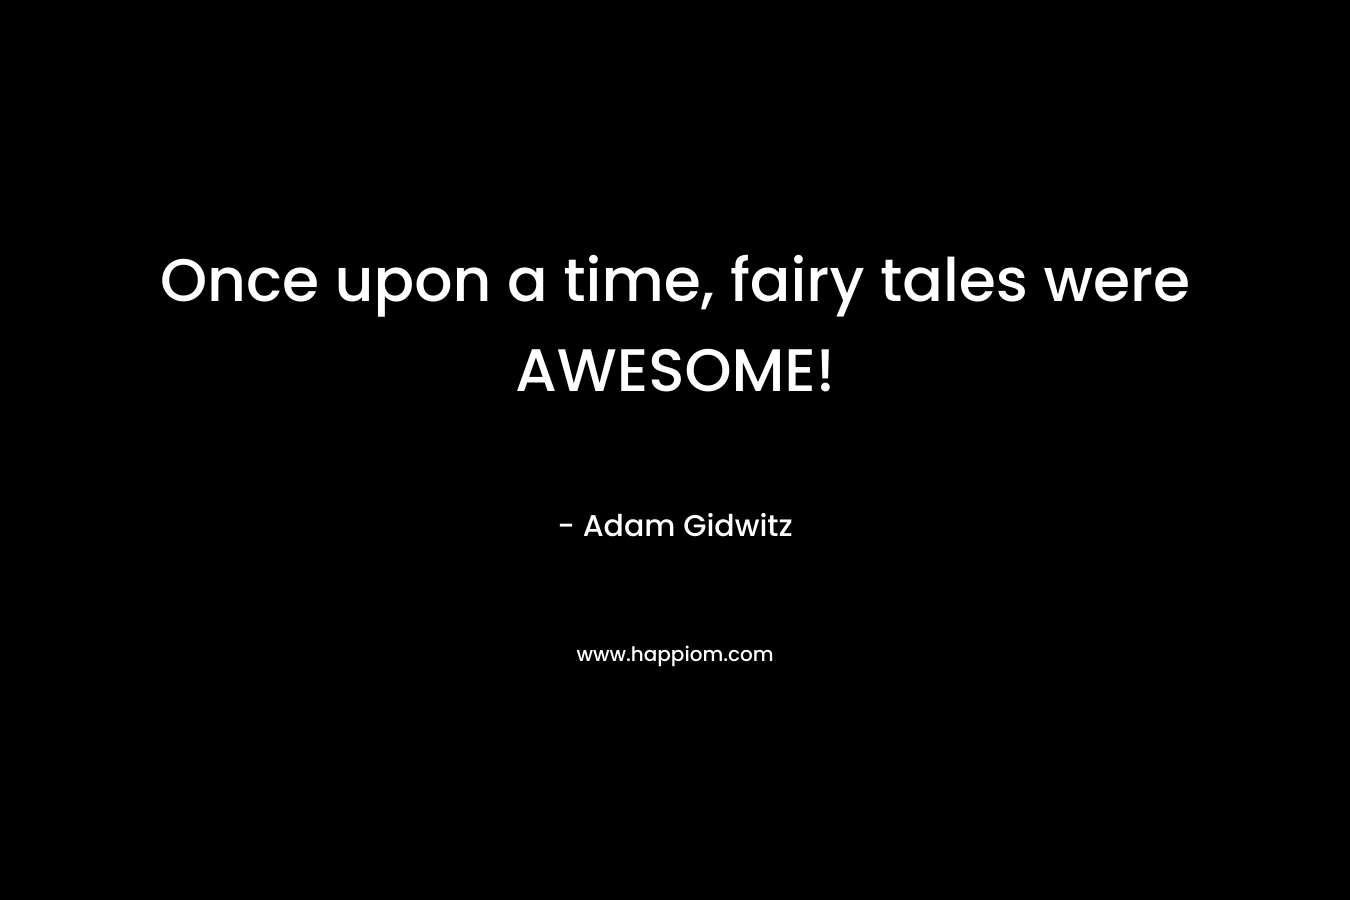 Once upon a time, fairy tales were AWESOME!